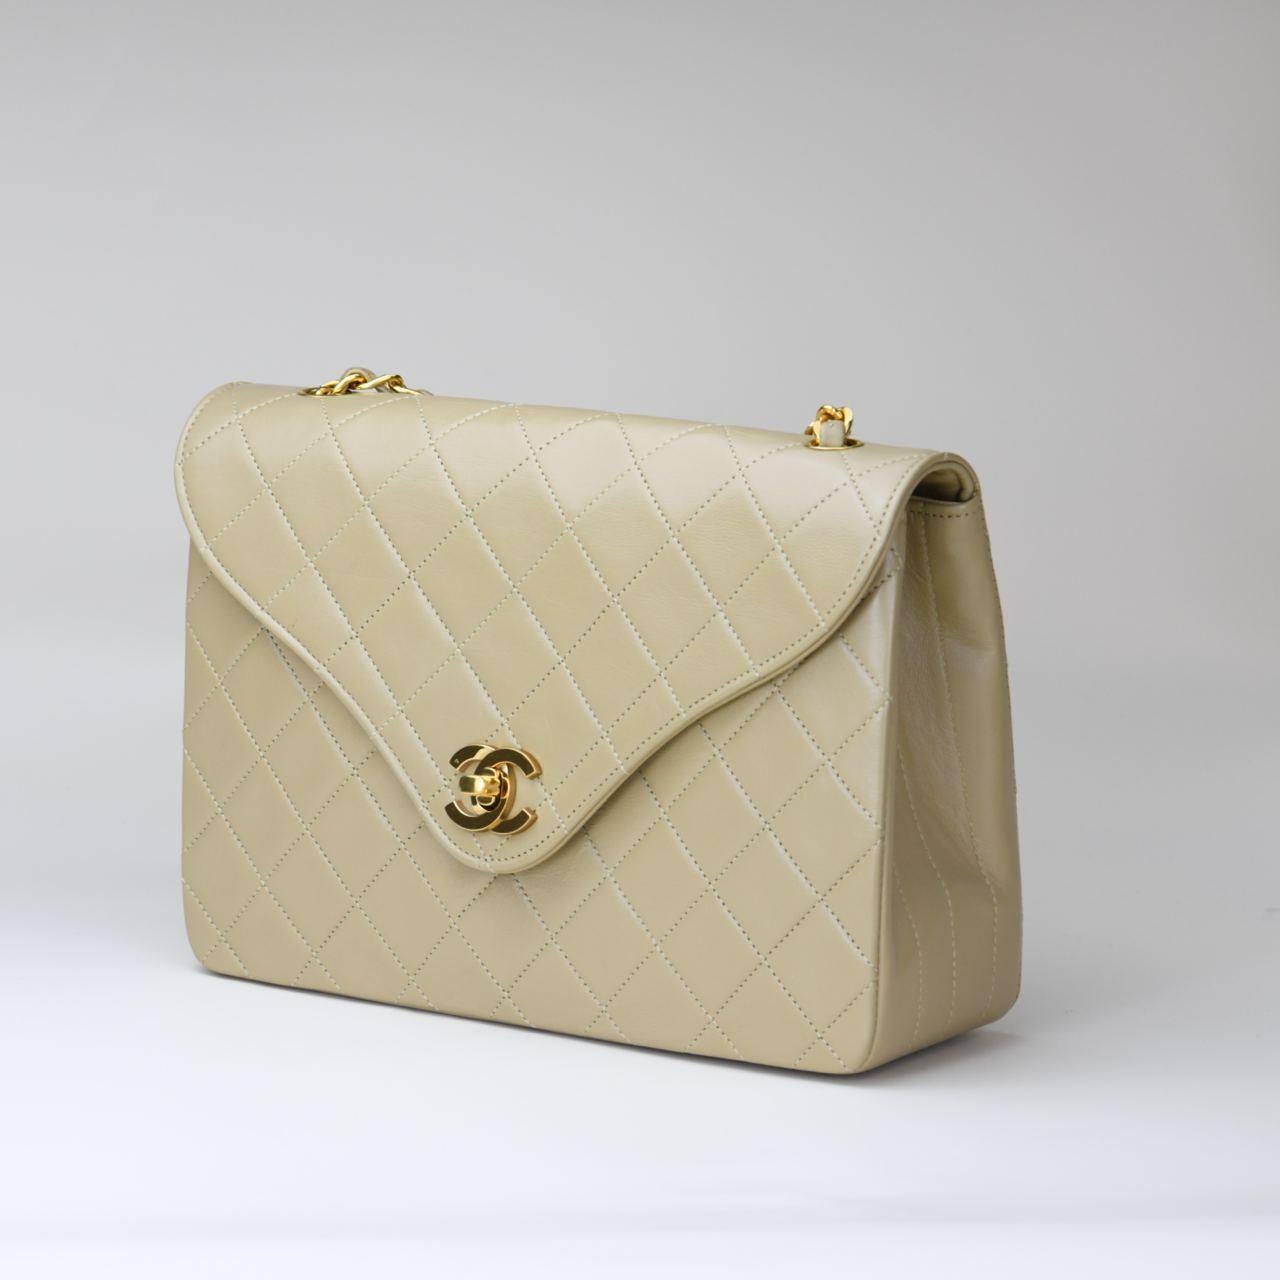 SKU 	AT-1004
Brand	Chanel
Serial No.	17****
Color	Beige
Date	Approx. 1990s
Metal	Gold
Material	Lambskin
Measurements	Approx. 24 x 15 x 7 cm
Condition	Excellent 
Comes with	Chanel Dust bag

If you are interested in any of our previously sold pieces,